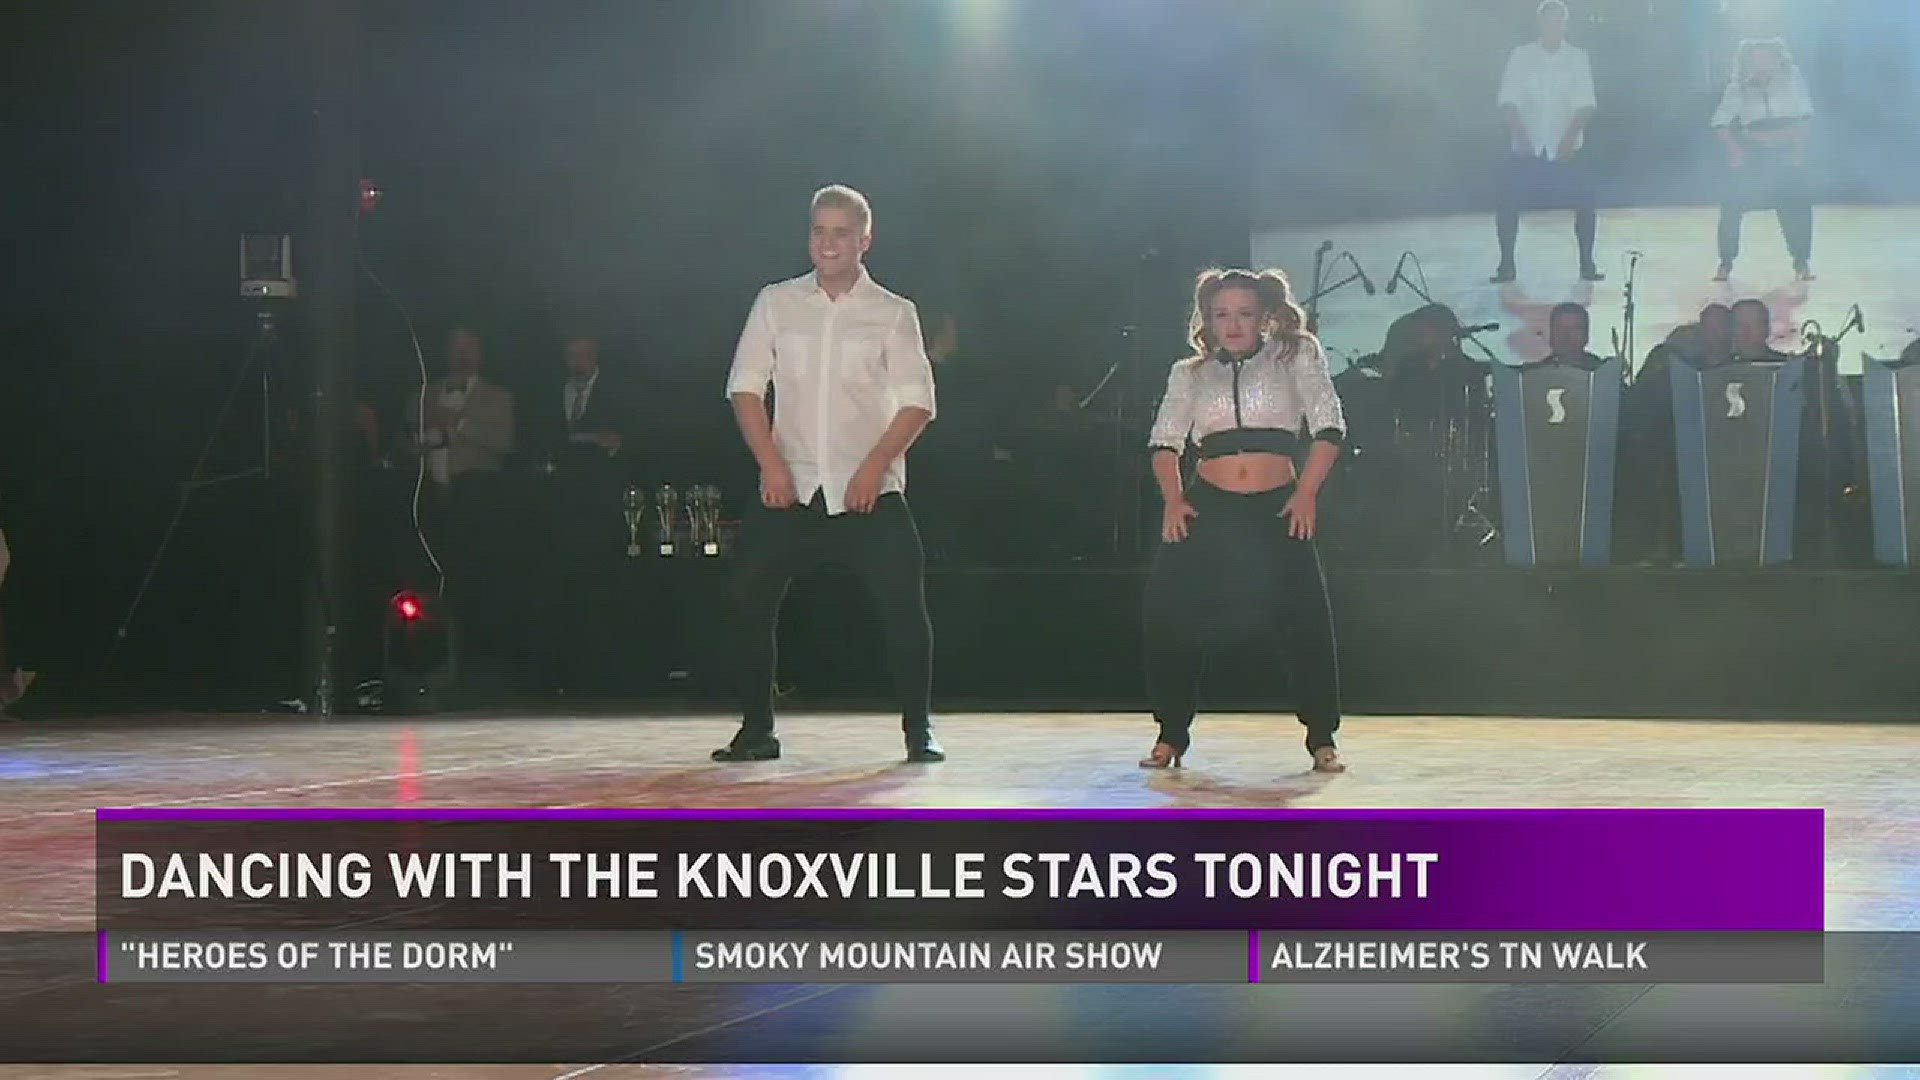 Our own Brandon Bates performs in Dancing with the Knoxville Stars